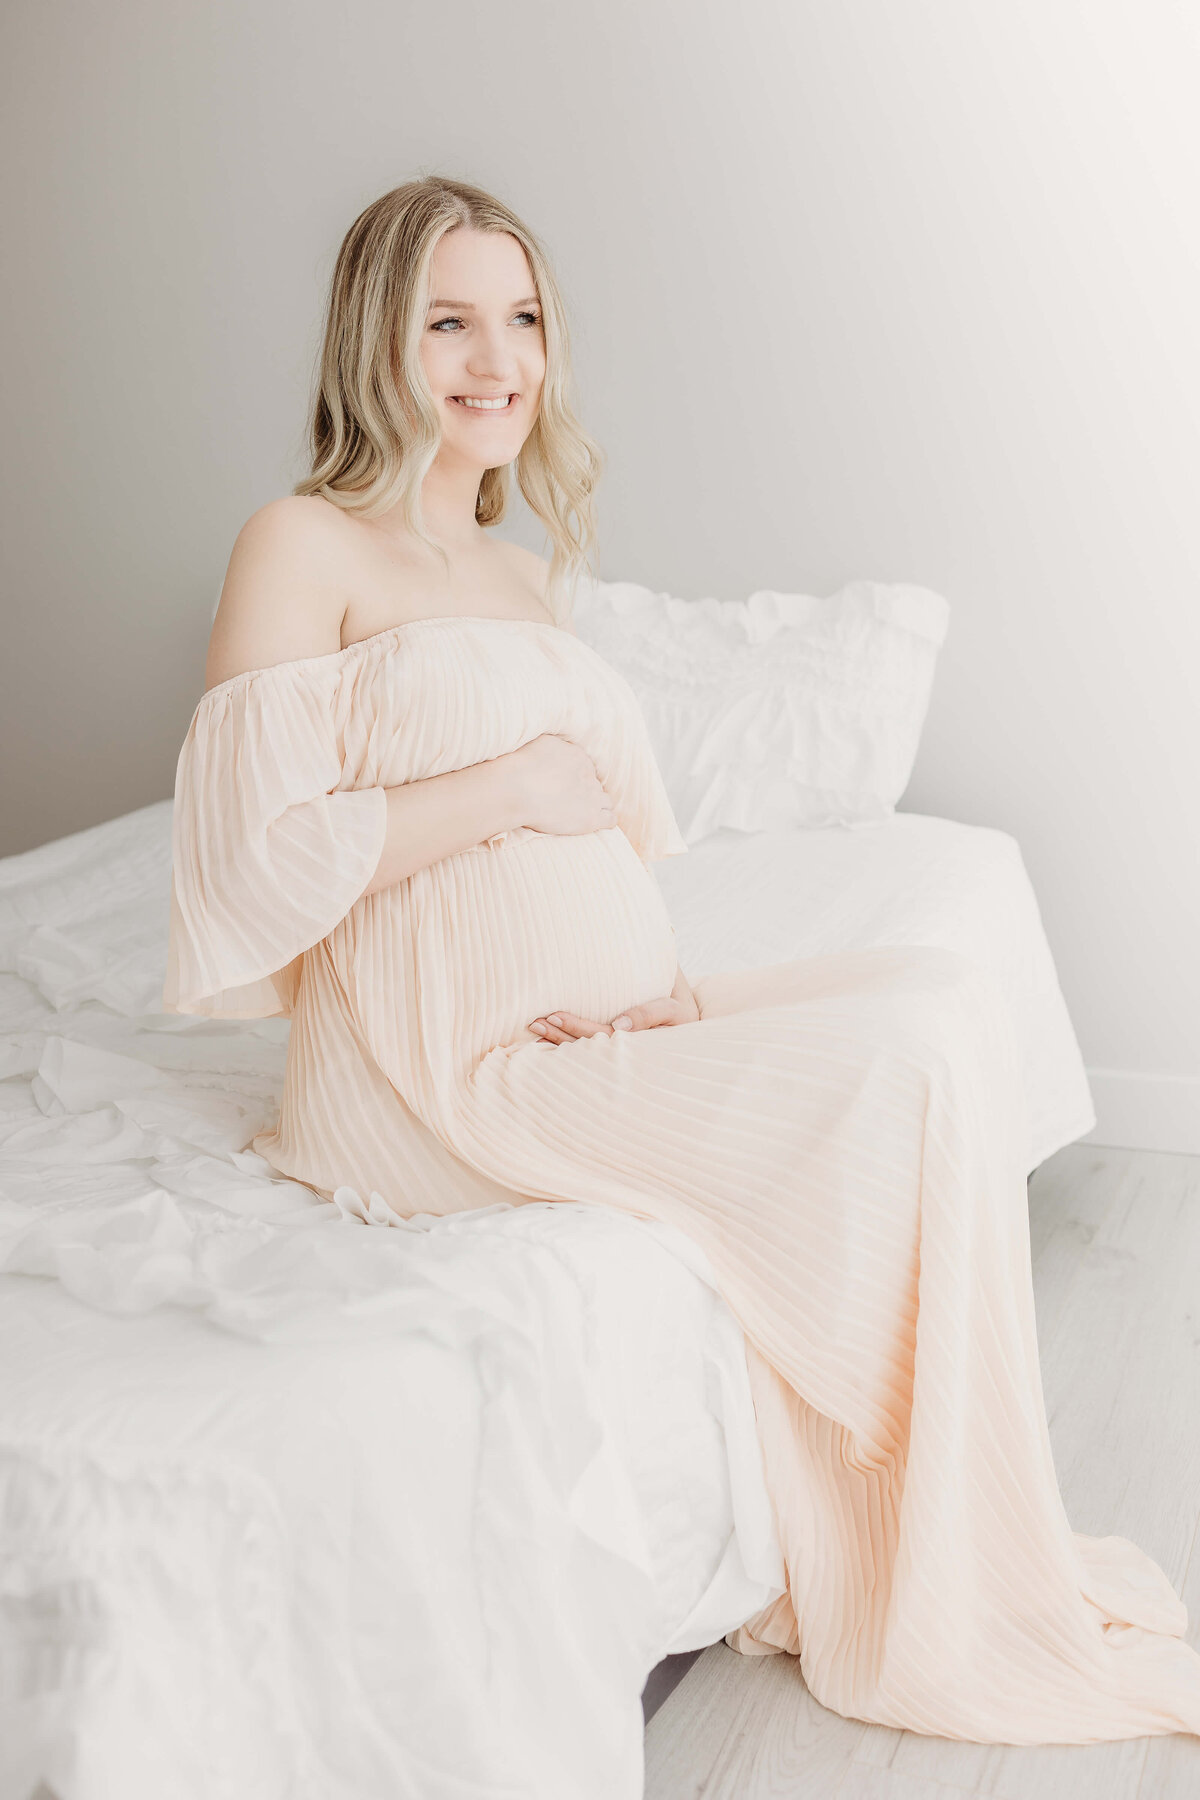 Blonde mom in light pink gown sitting on bed and smiling